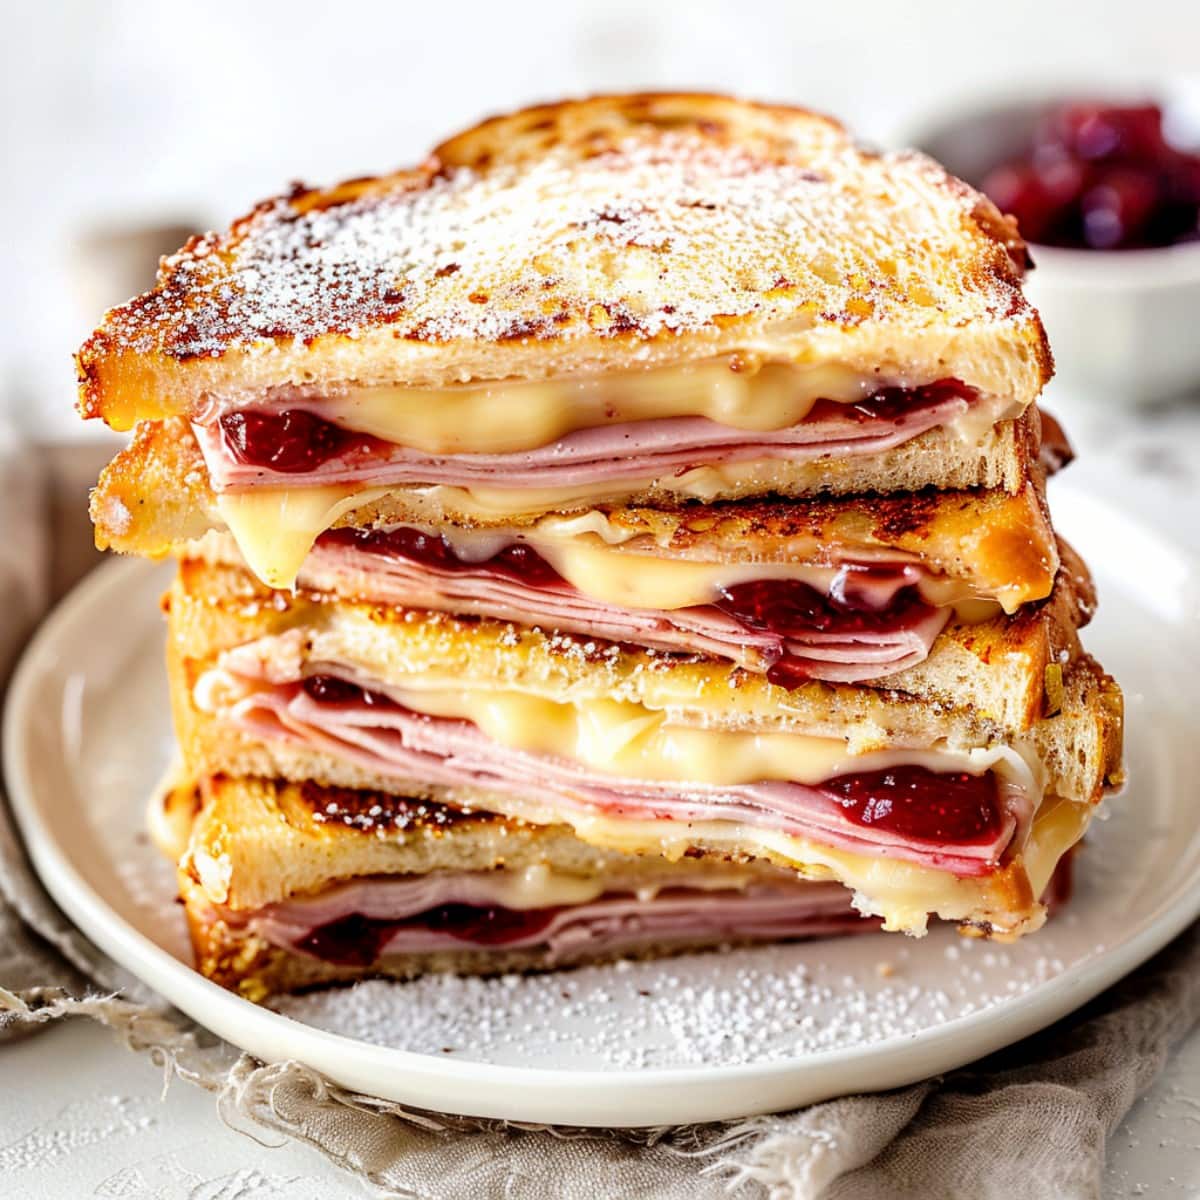 Homemade Monte Cristo sandwich, toasted to crispy perfection and oozing with melted cheese, ham, turkey and raspberry preserve